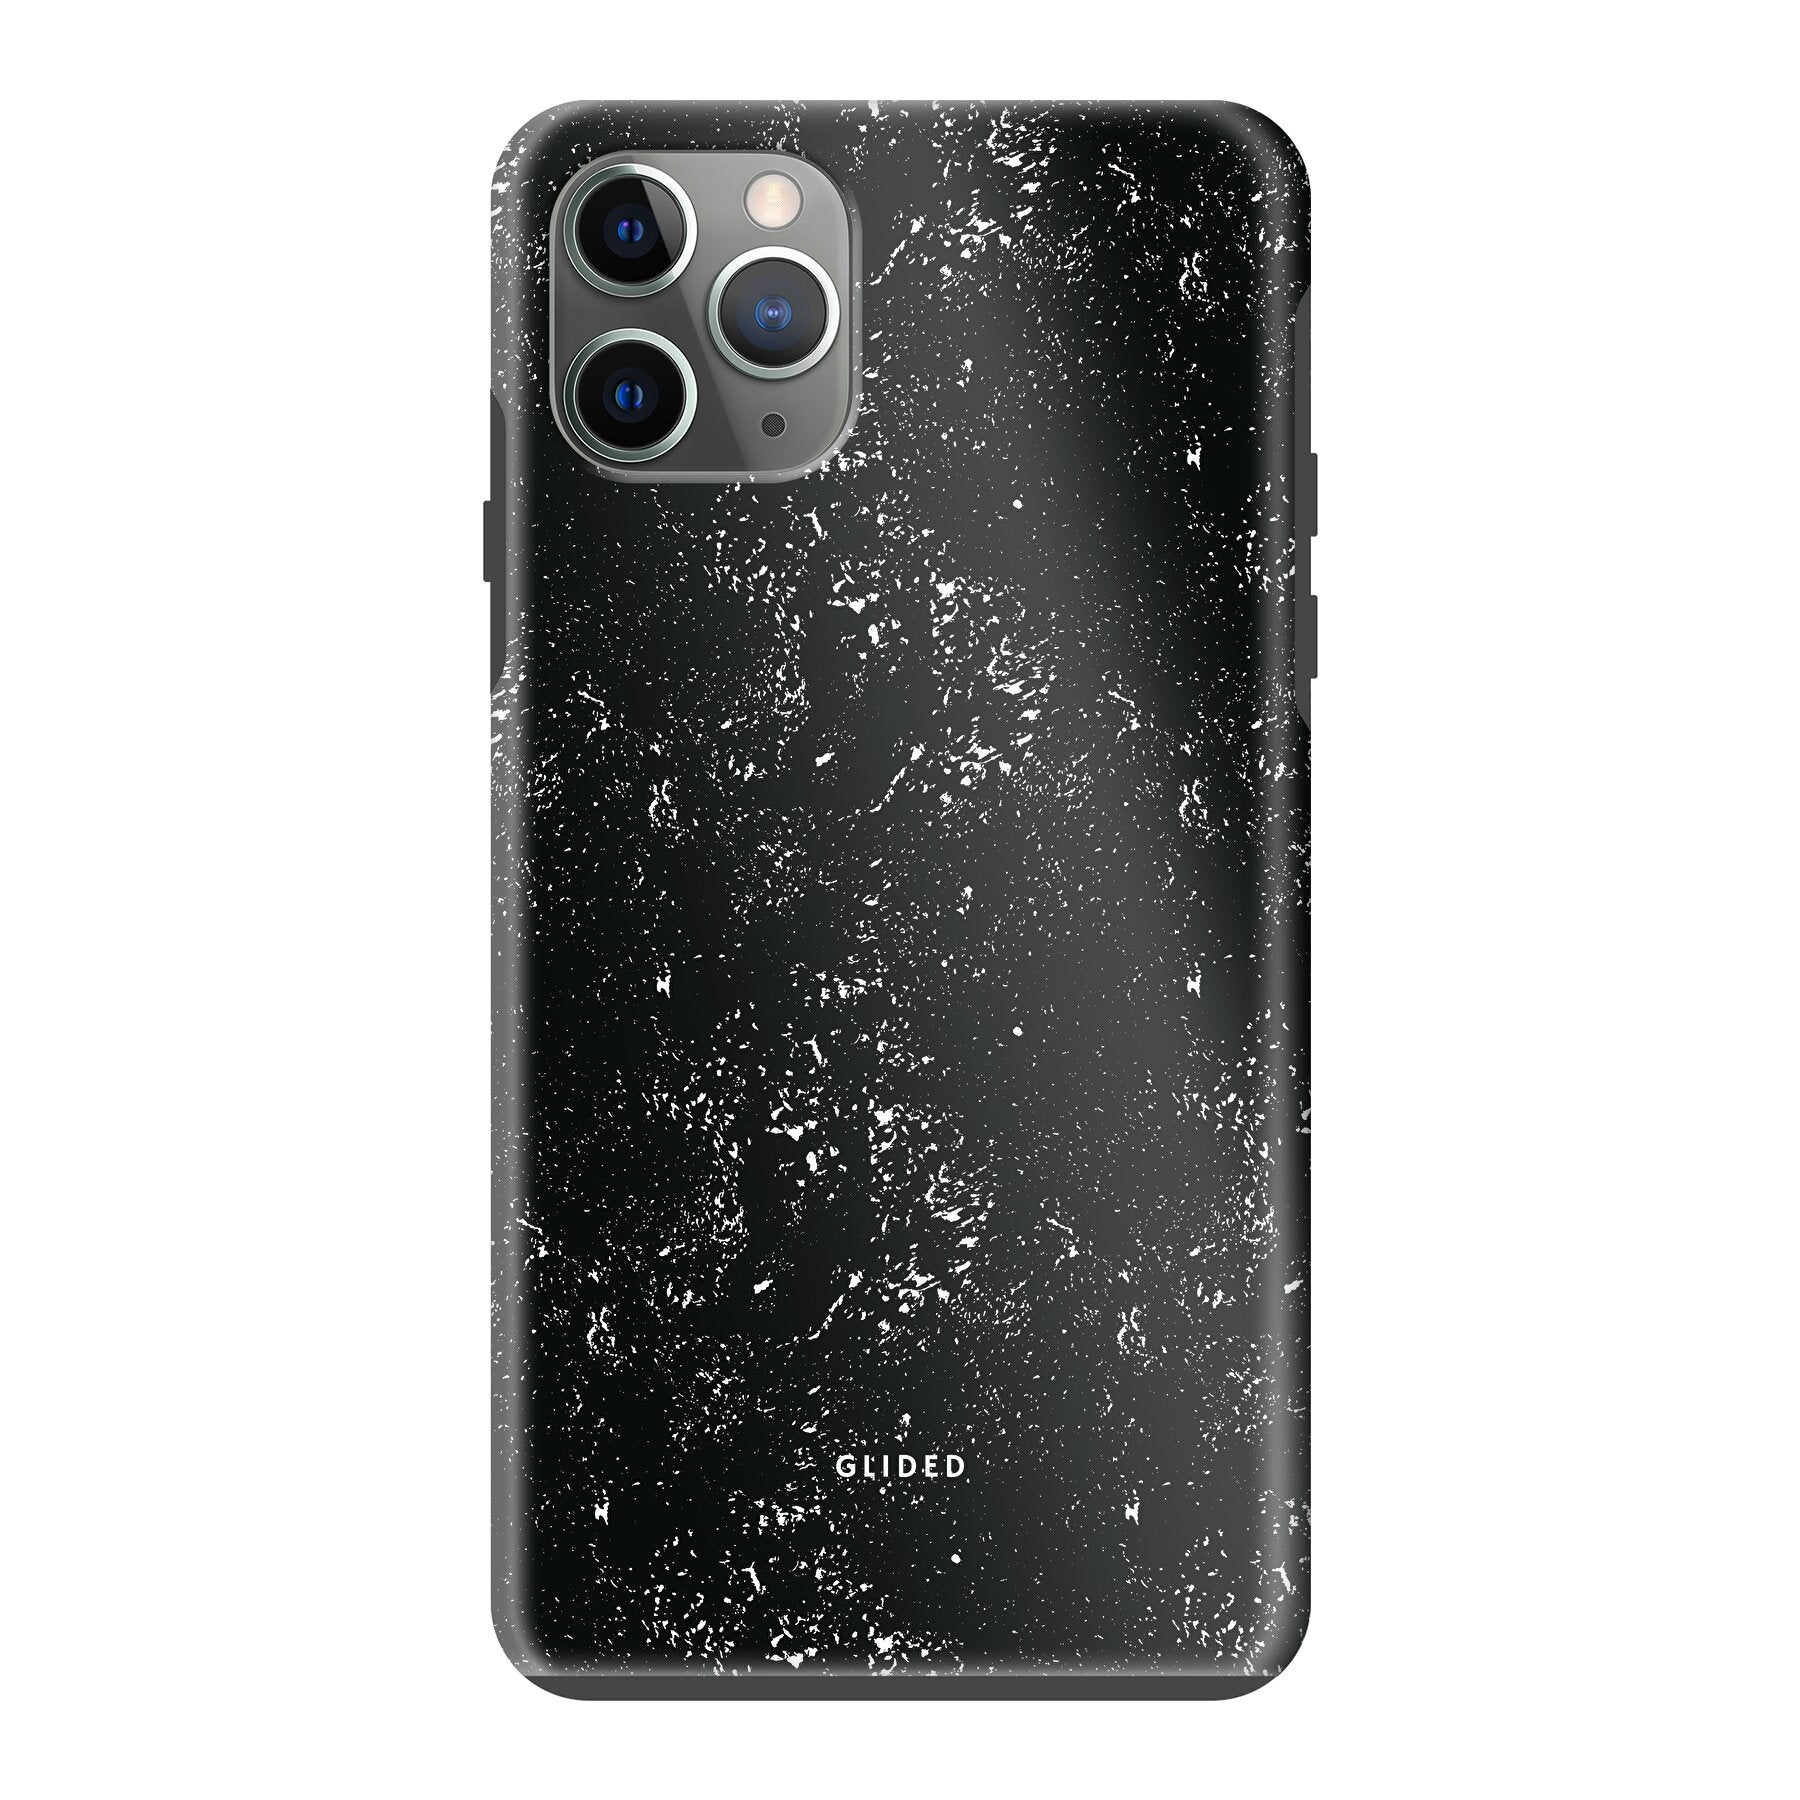 Skytly - iPhone 11 Pro Max Handyhülle Tough case